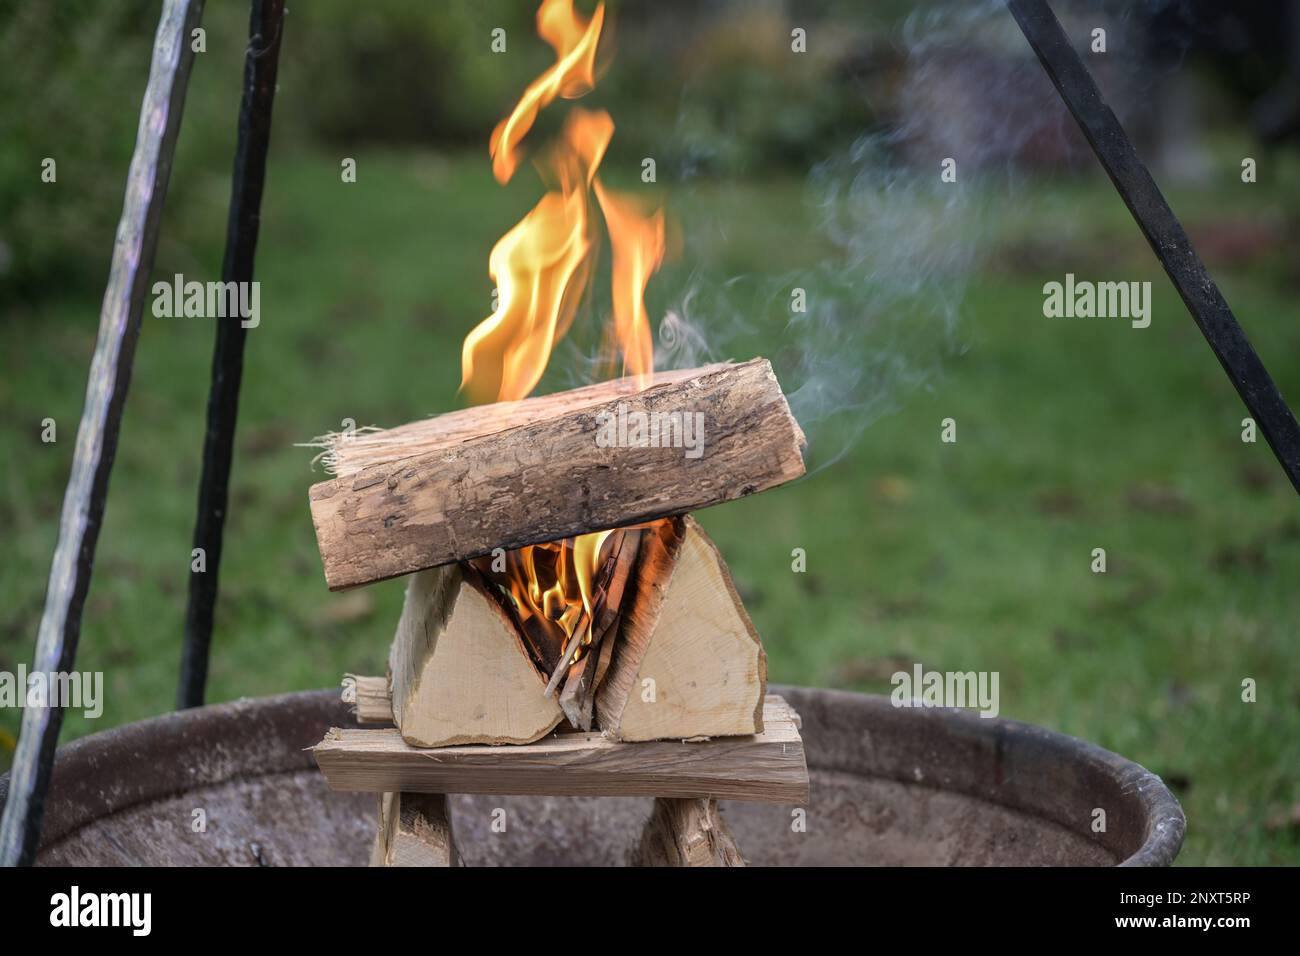 Clever stacked firewood logs burning with flames and smoke in a fire bowl under a tripod grill in a garden for a barbecue party, copy space, selected Stock Photo